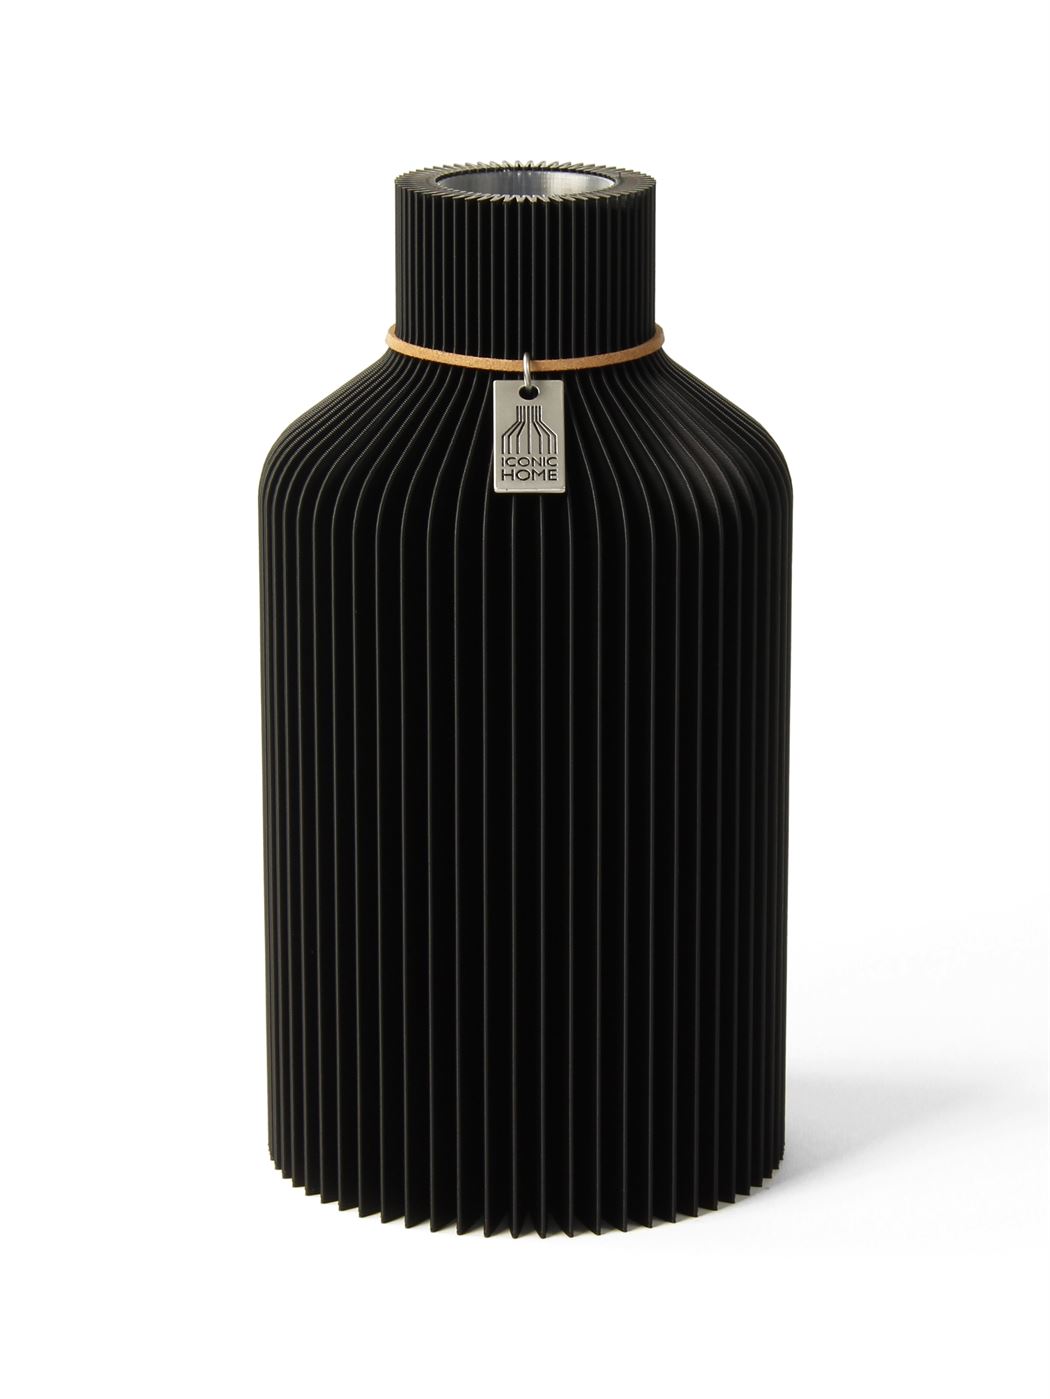 Vase Pure Deep Black Small ICONIC HOME